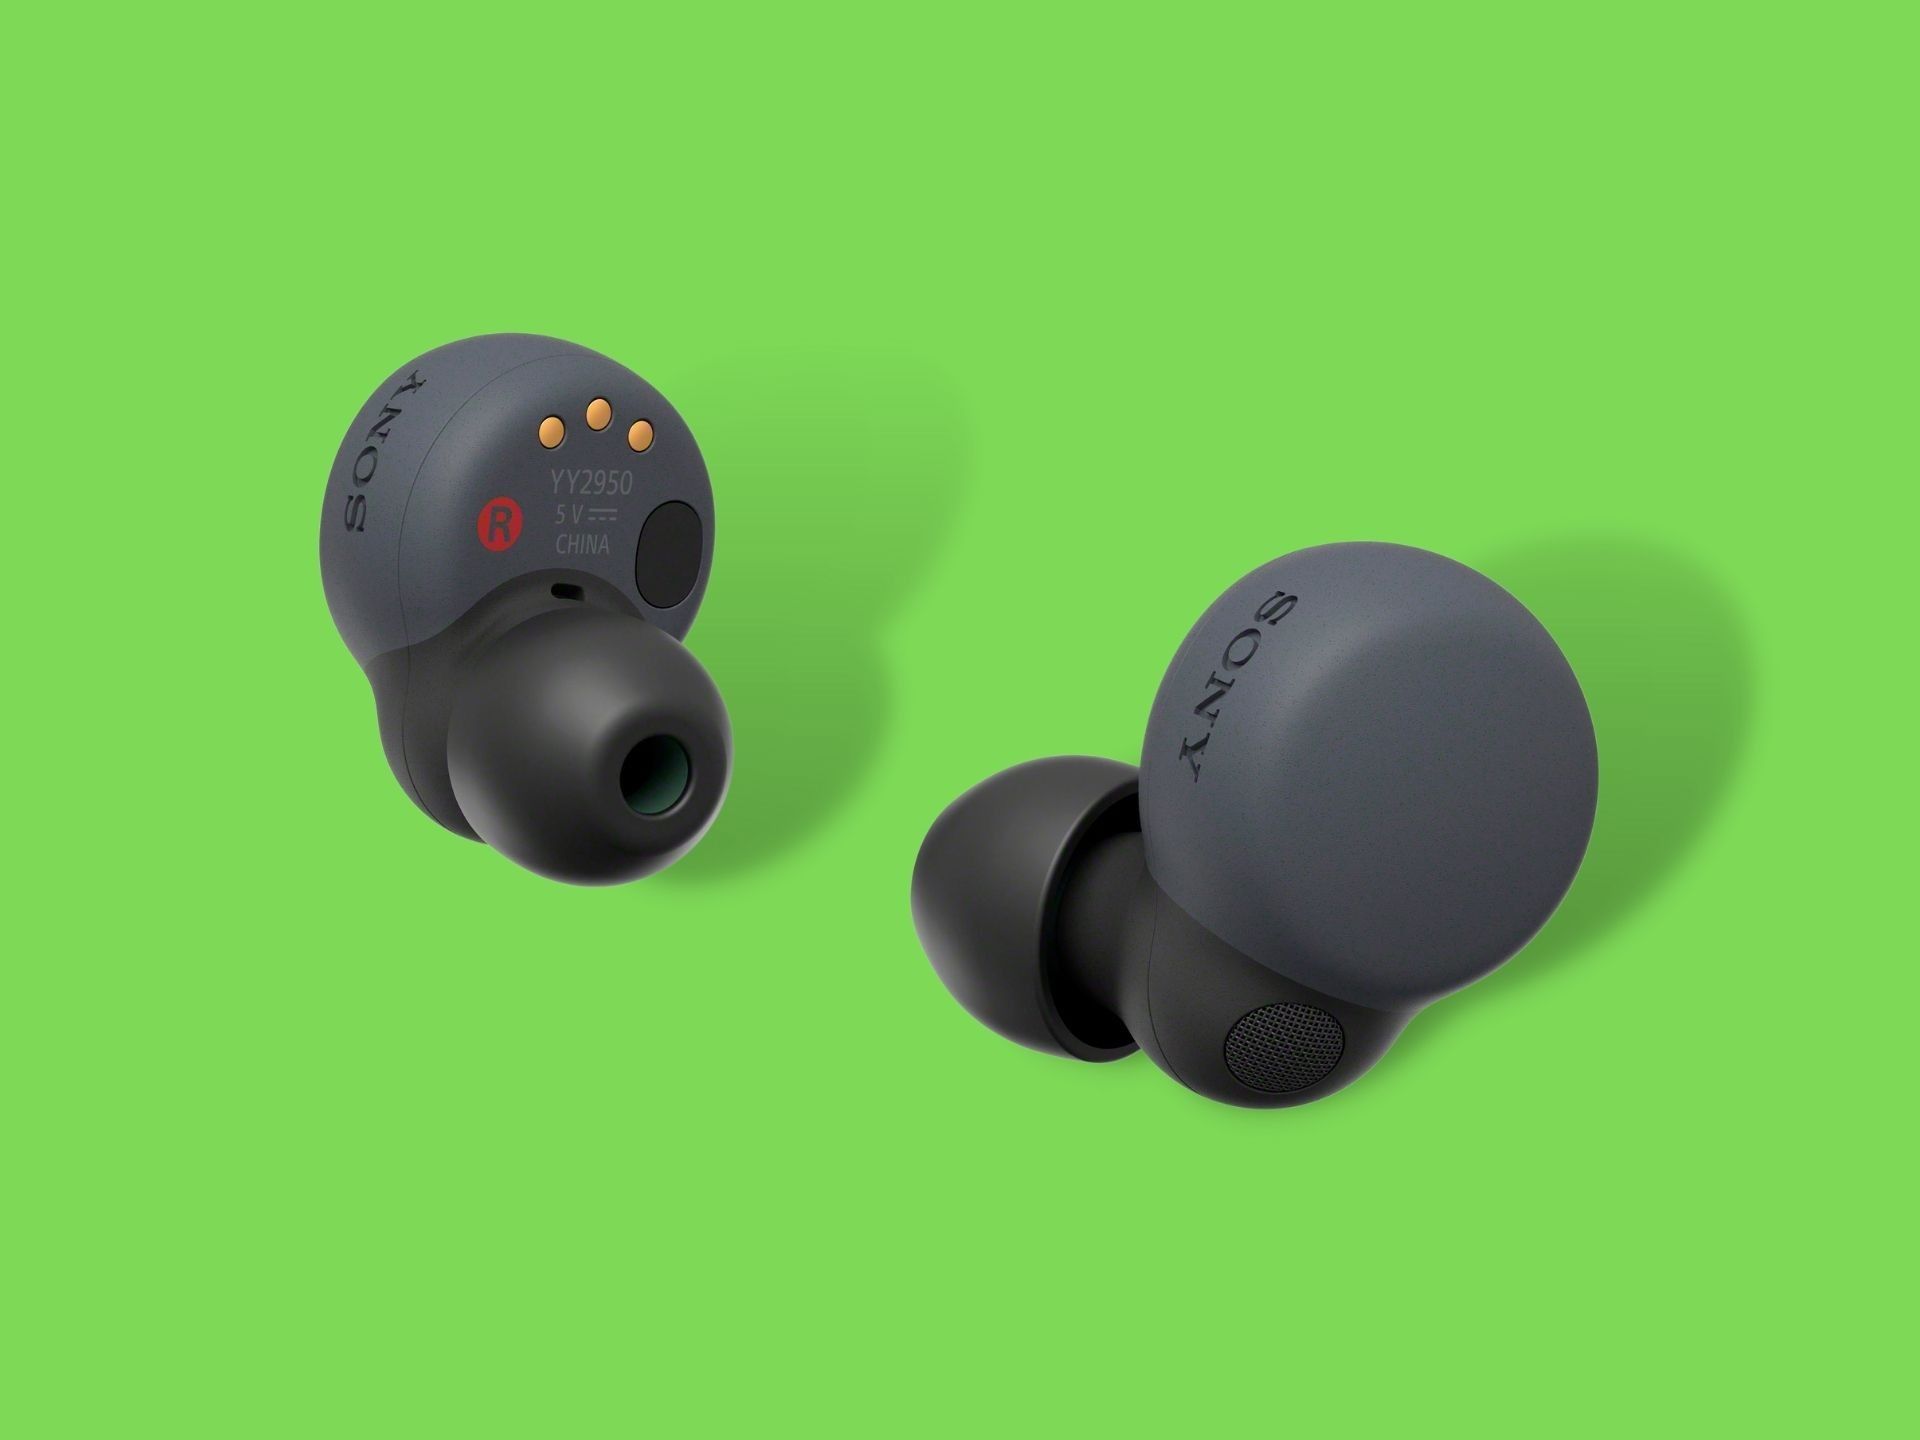 Sony LinkBuds S: 2 reasons why they may be my next earbuds